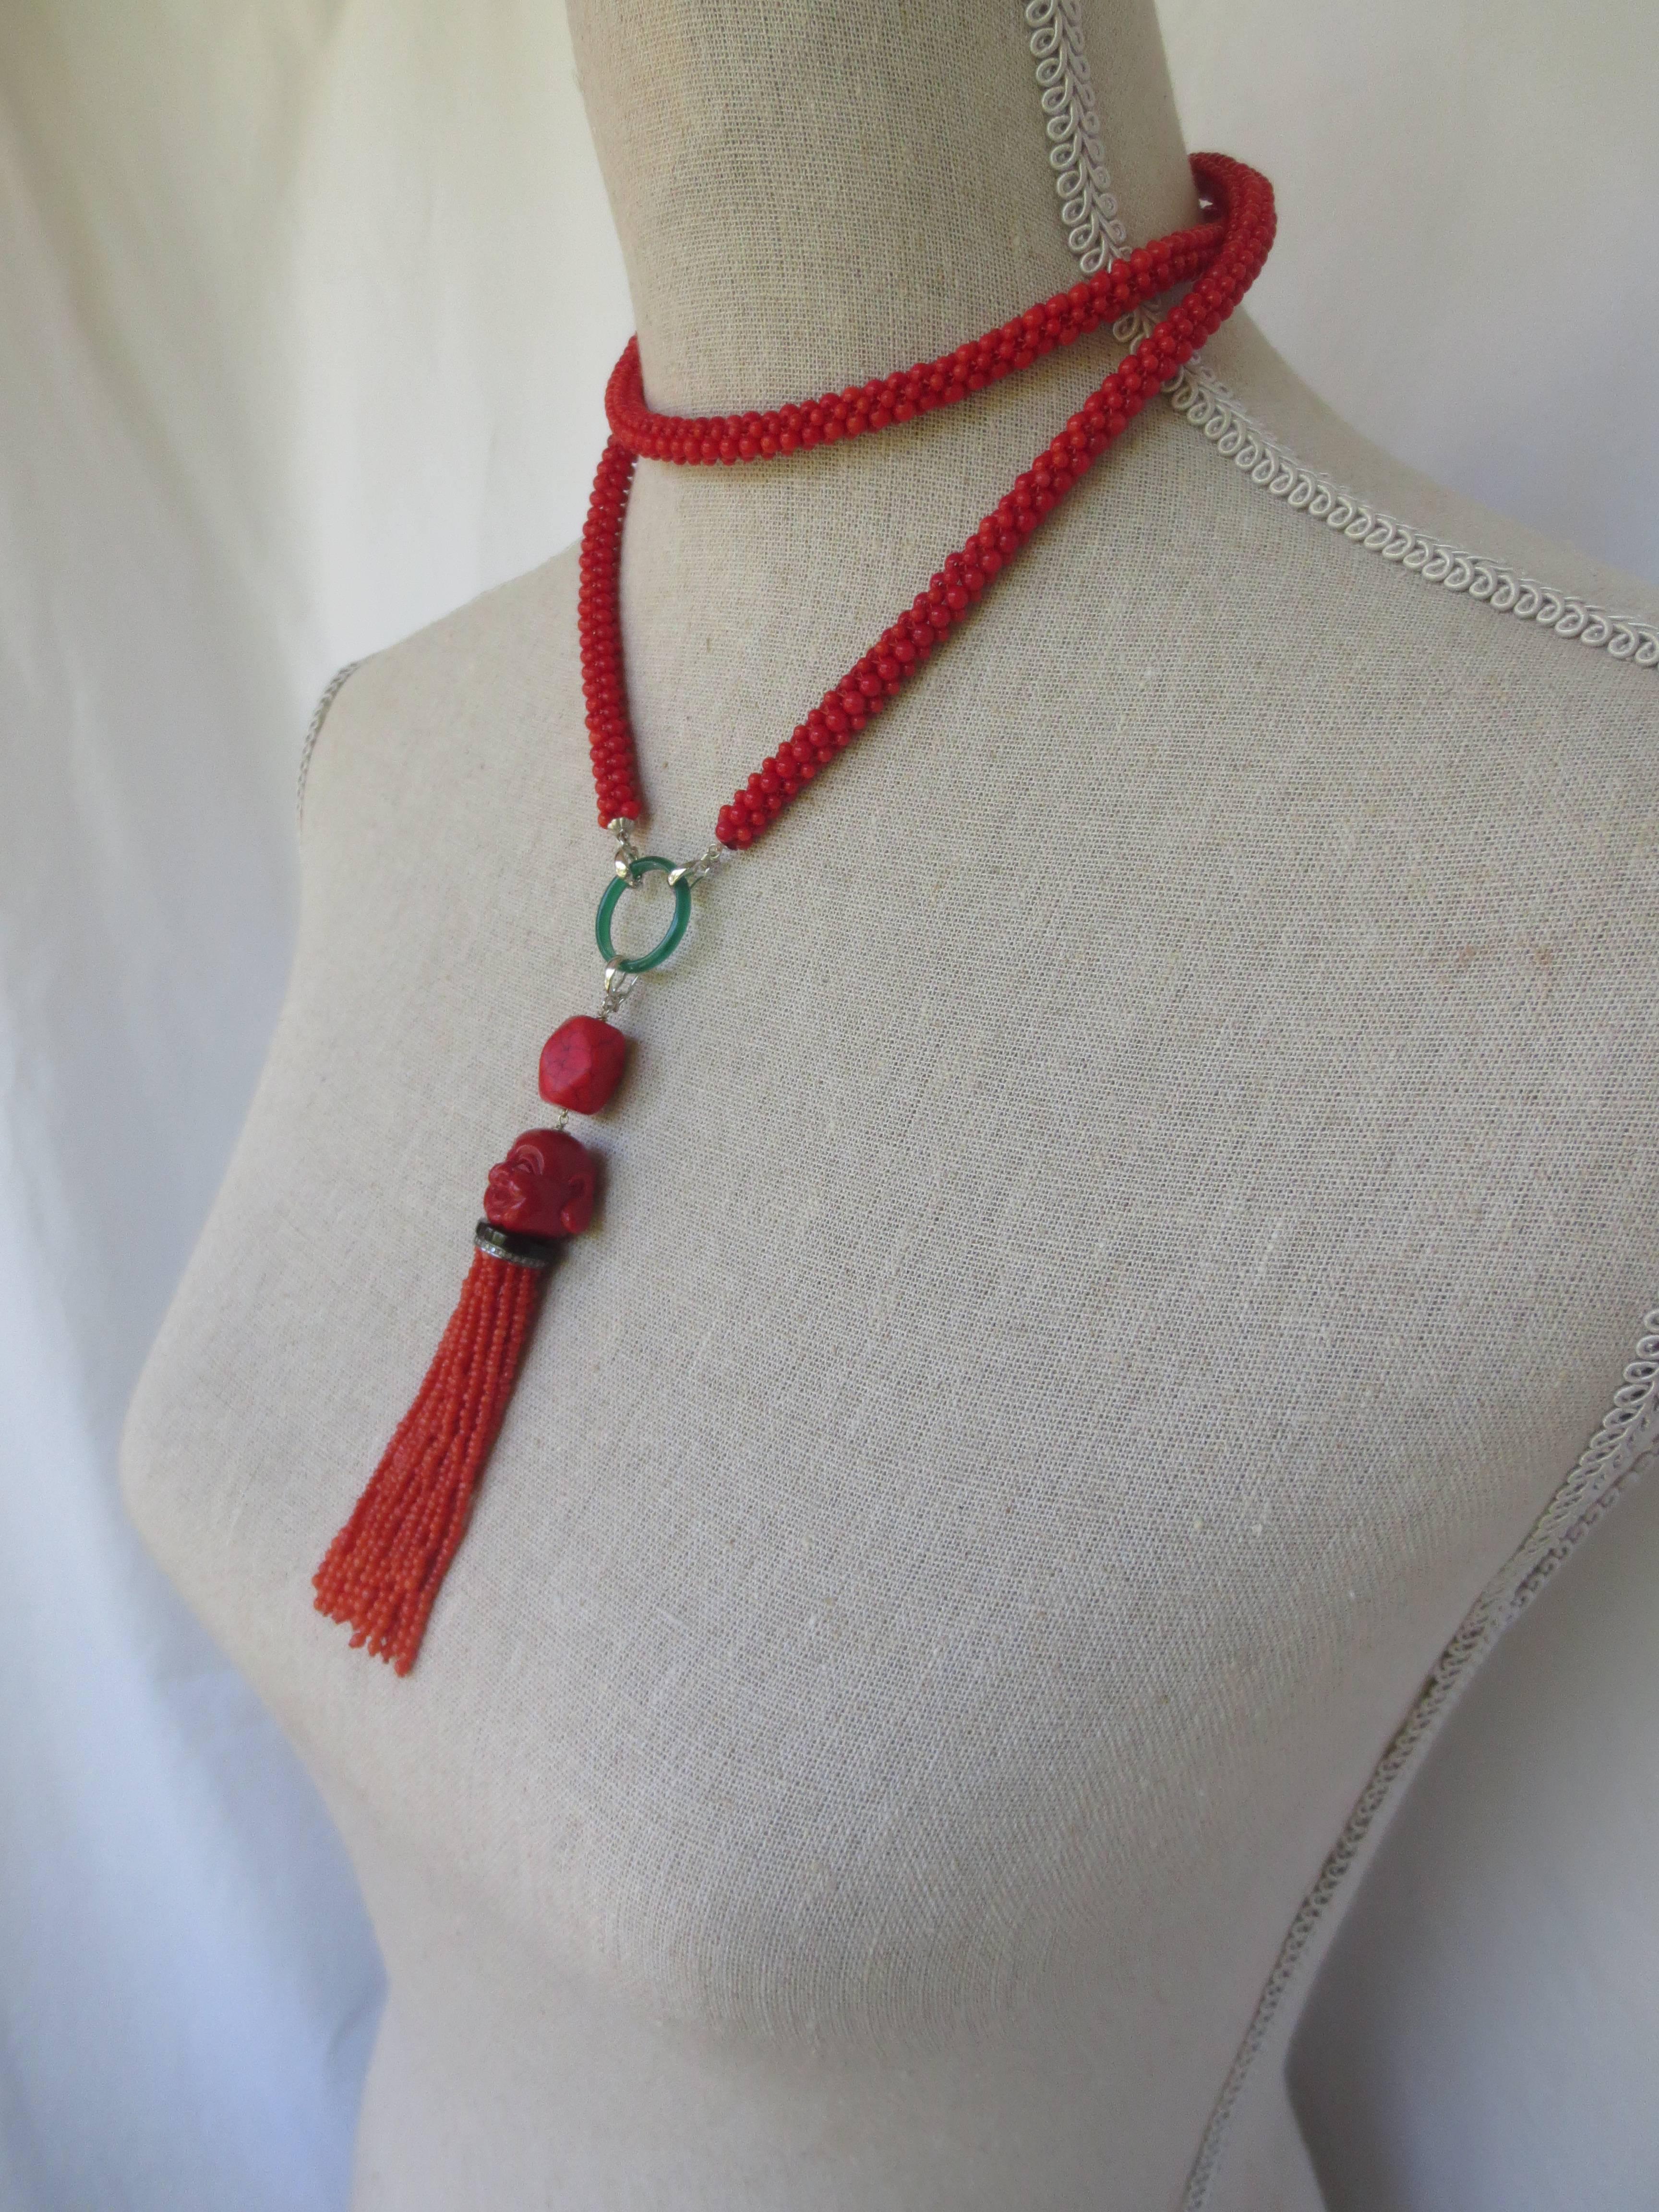 Coral beads are tightly woven using rope style techniques, to create a dimensional and robust piece. This multi-functional necklace can worn long and open, or wrapped and snug; with or without tassel. 14 k white gold findings suspend a green onyx